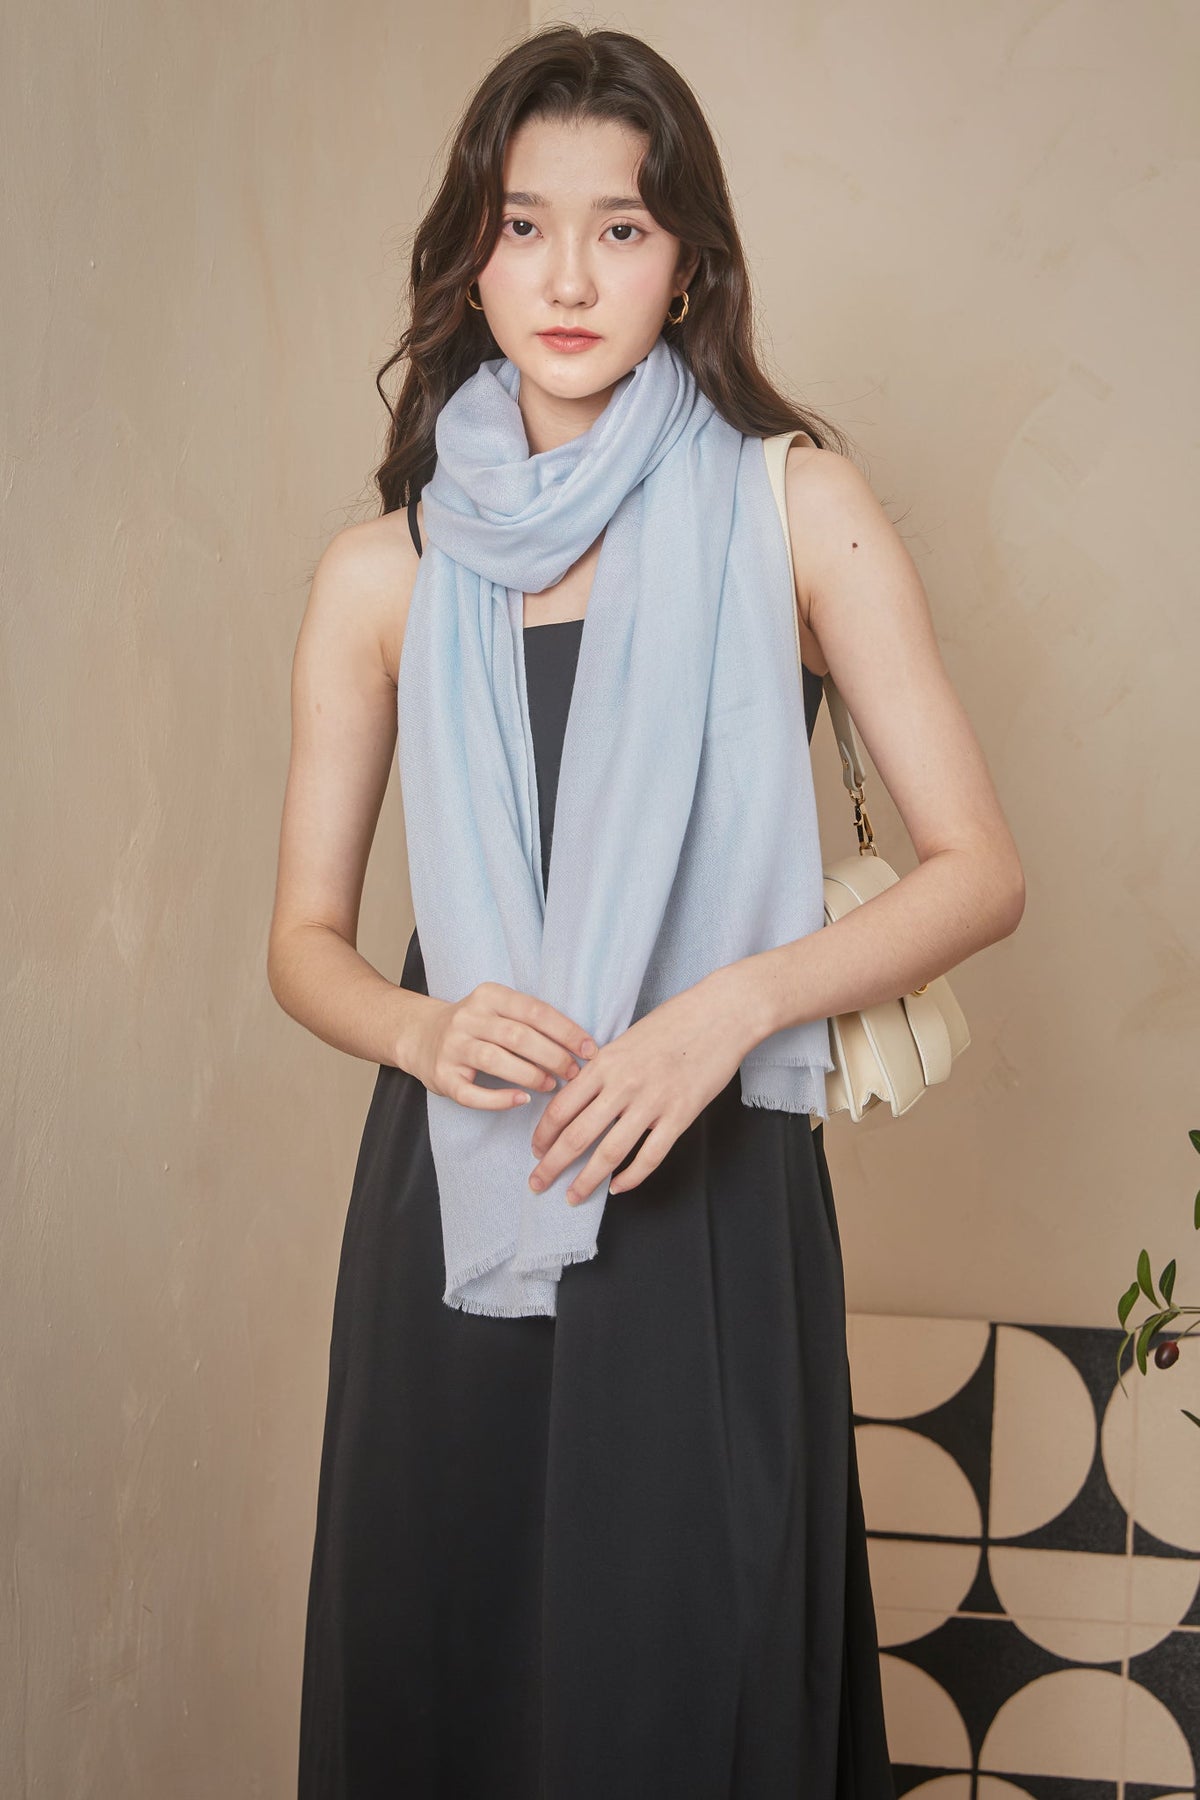 Restocked* Luxe Cashmere Shawl in Baby Blue